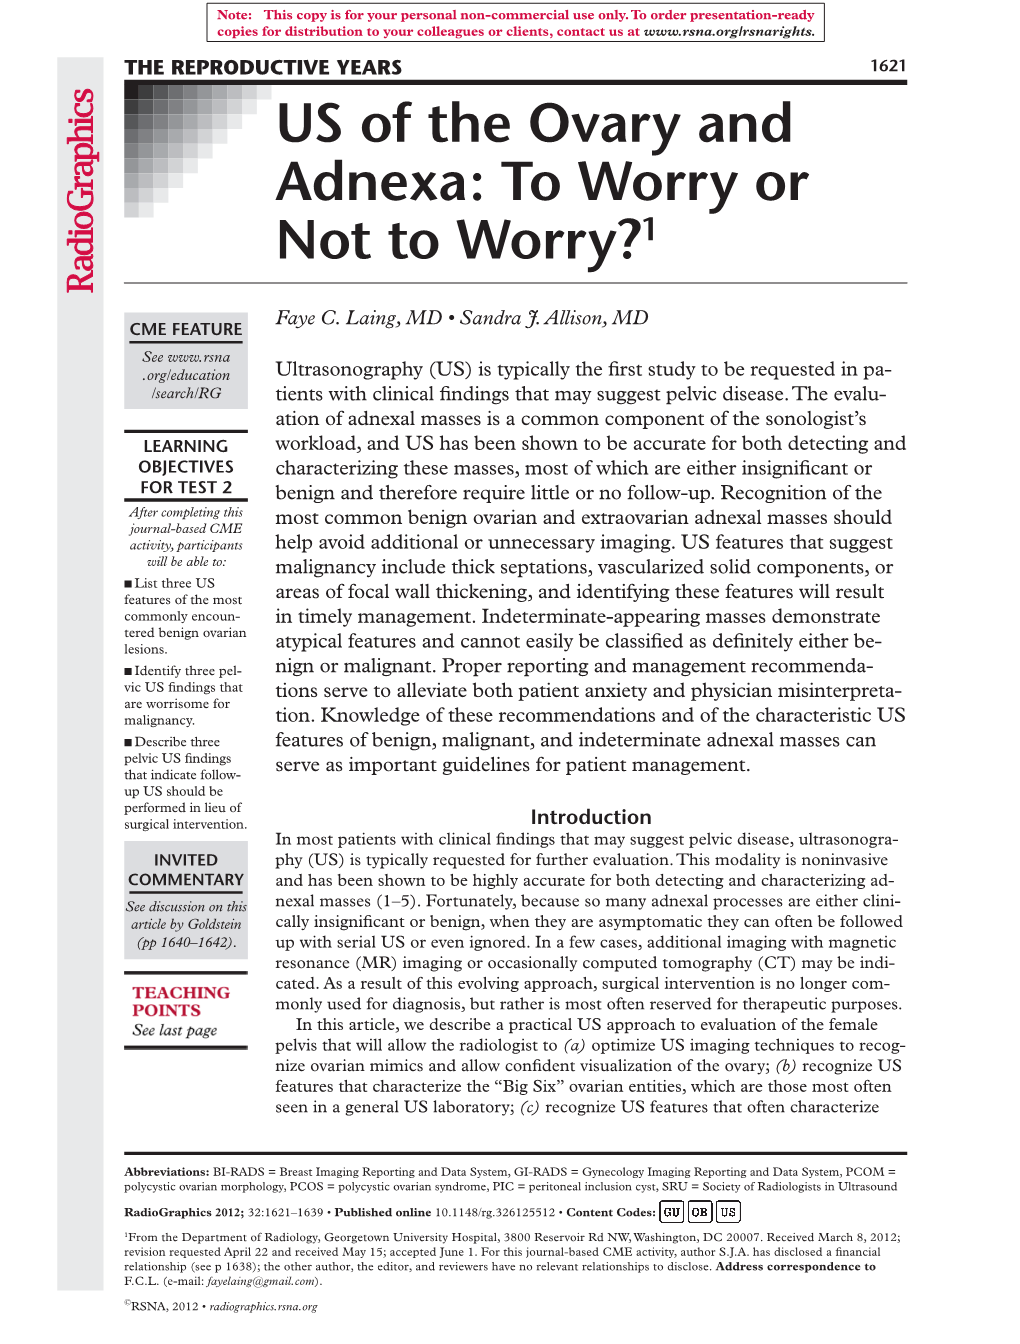 US of the Ovary and Adnexa: to Worry Or Not to Worry?1